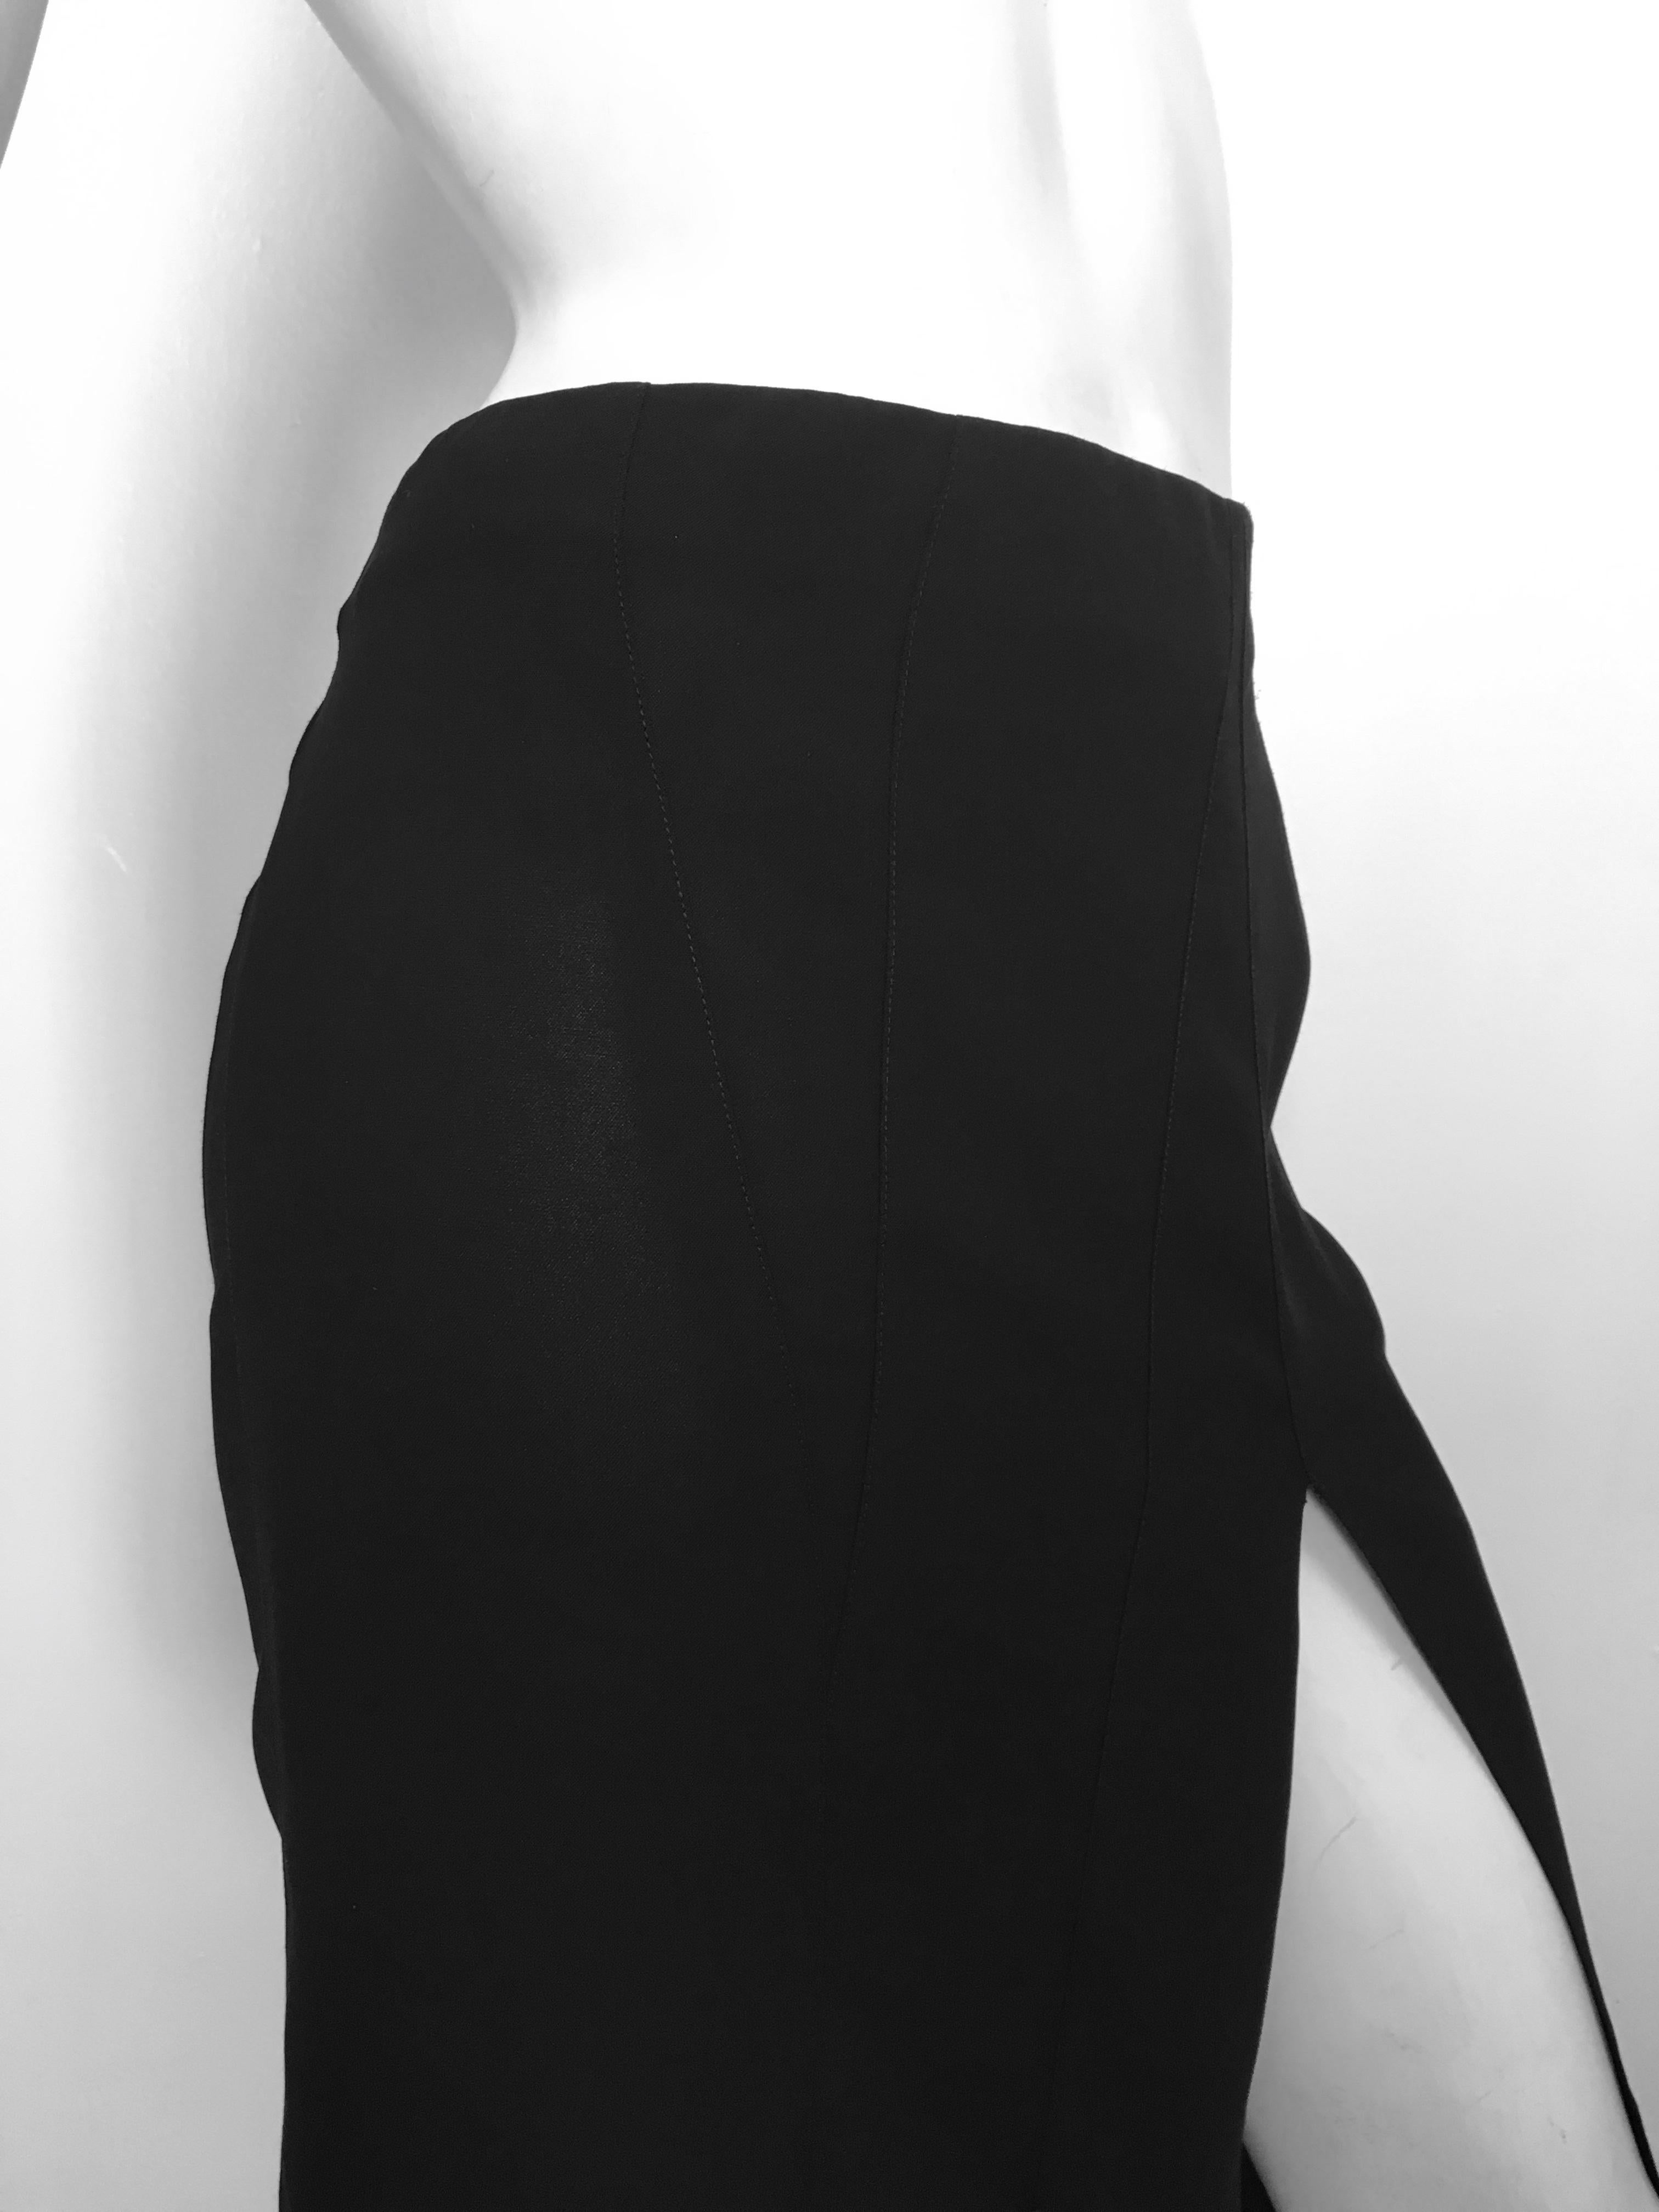 Donna Karan 1990s Black Sheer Skirt Size 8, made in Italy. For Sale 1